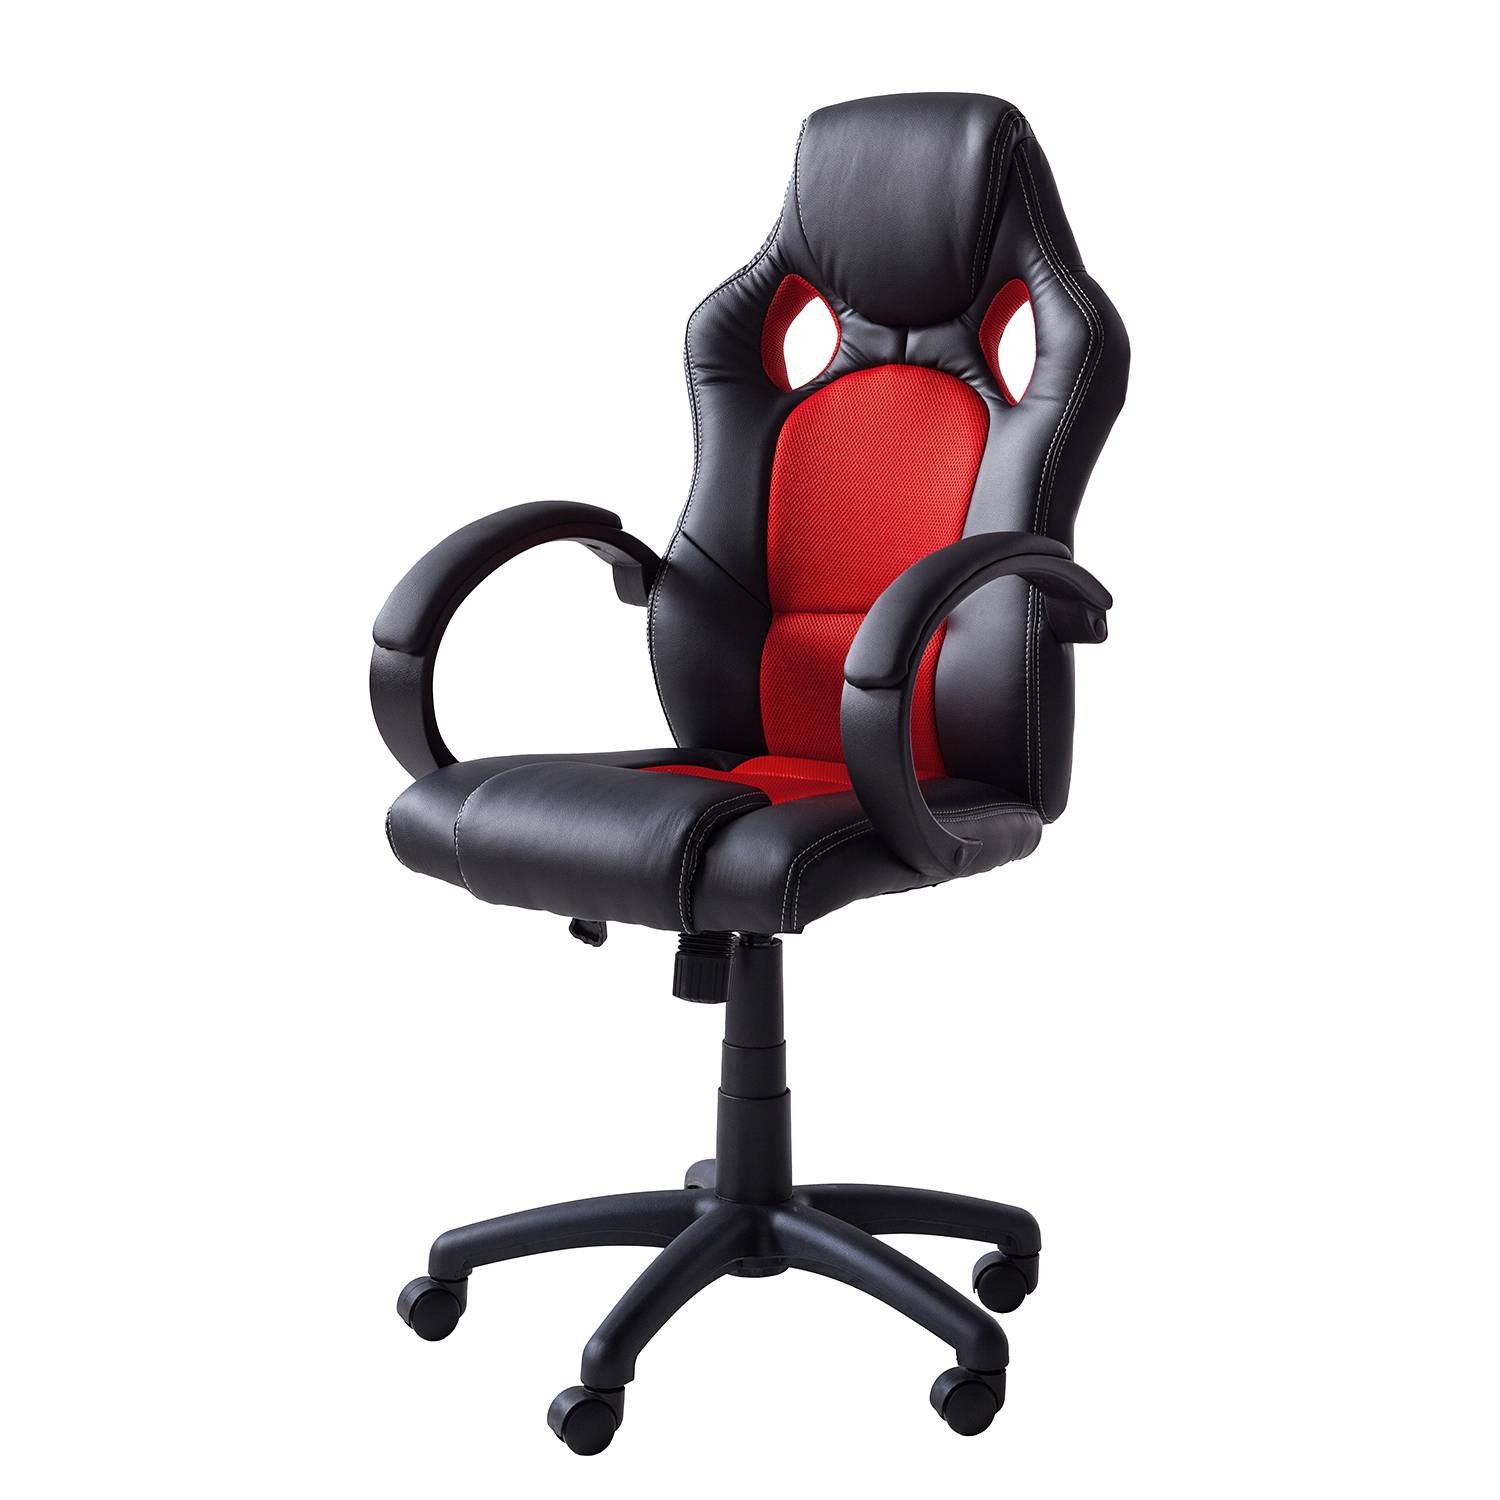 Creatice Scorpion Gaming Chair Amazon with Simple Decor